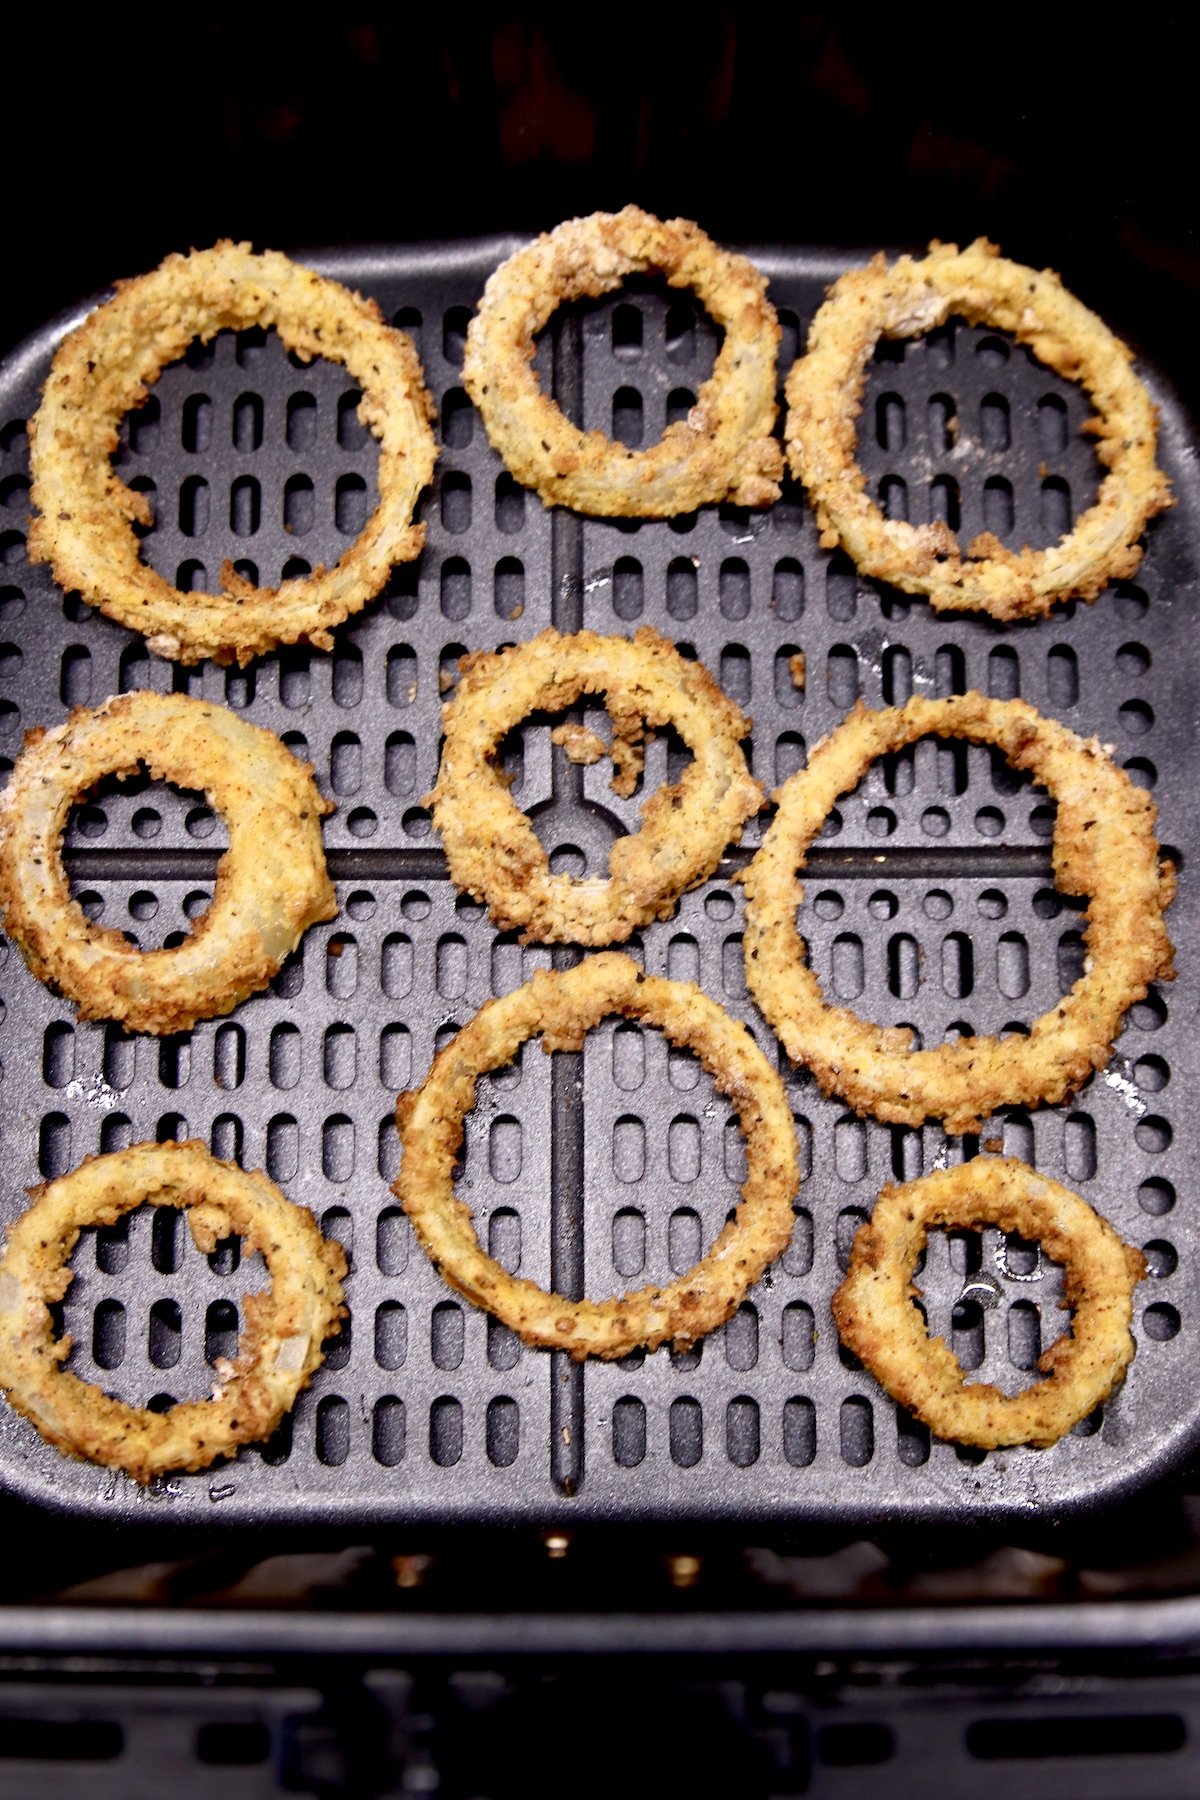 air fryer basket with golden brown onion rings